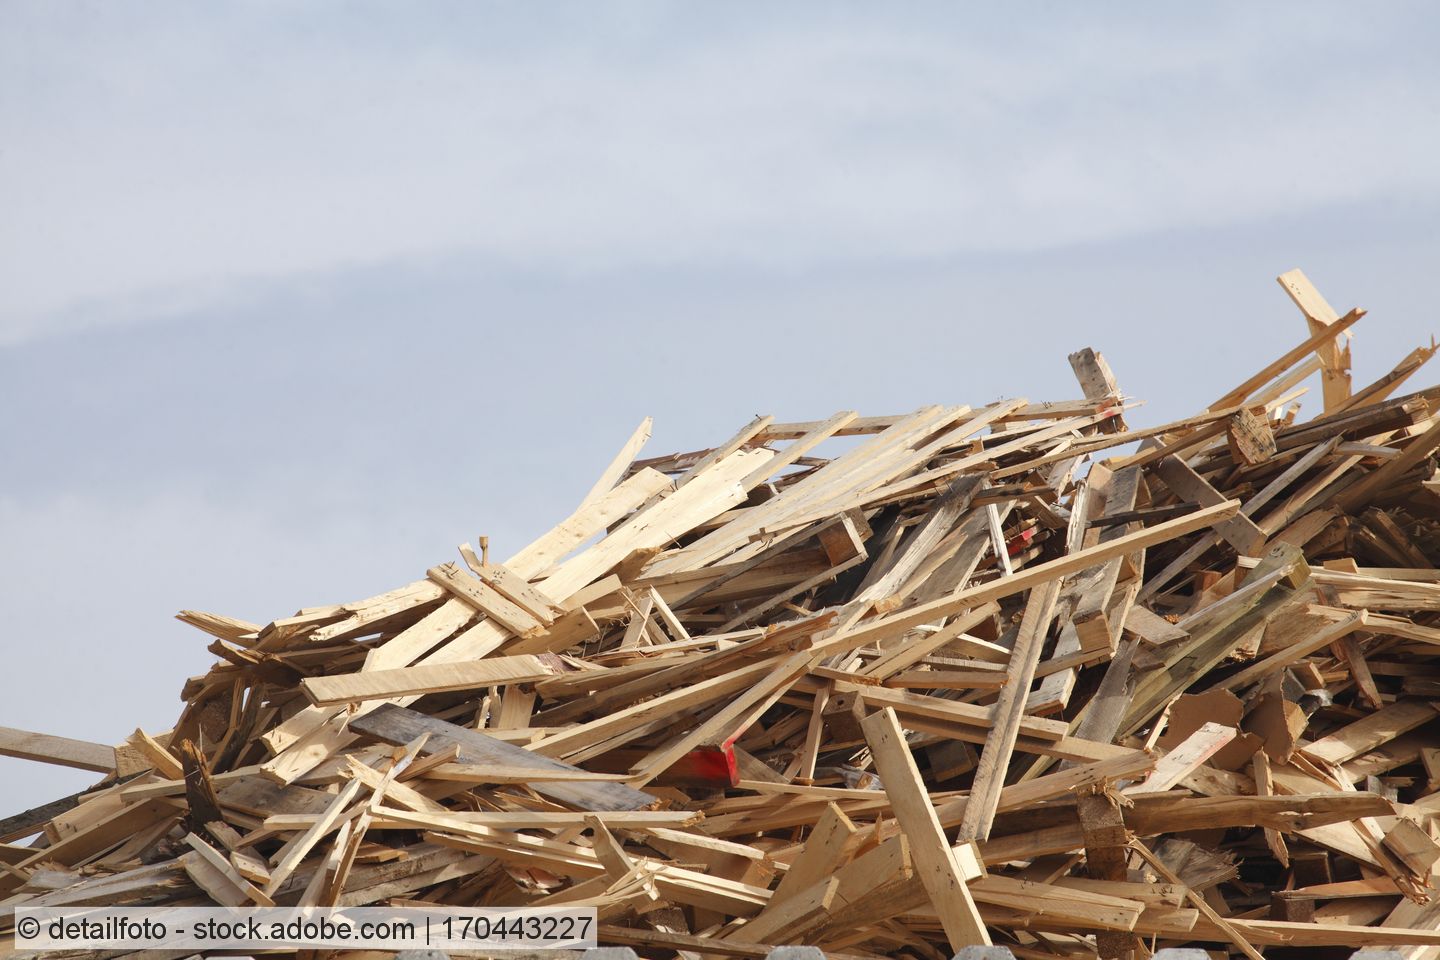 Unprocessed waste wood stored in a pile. 